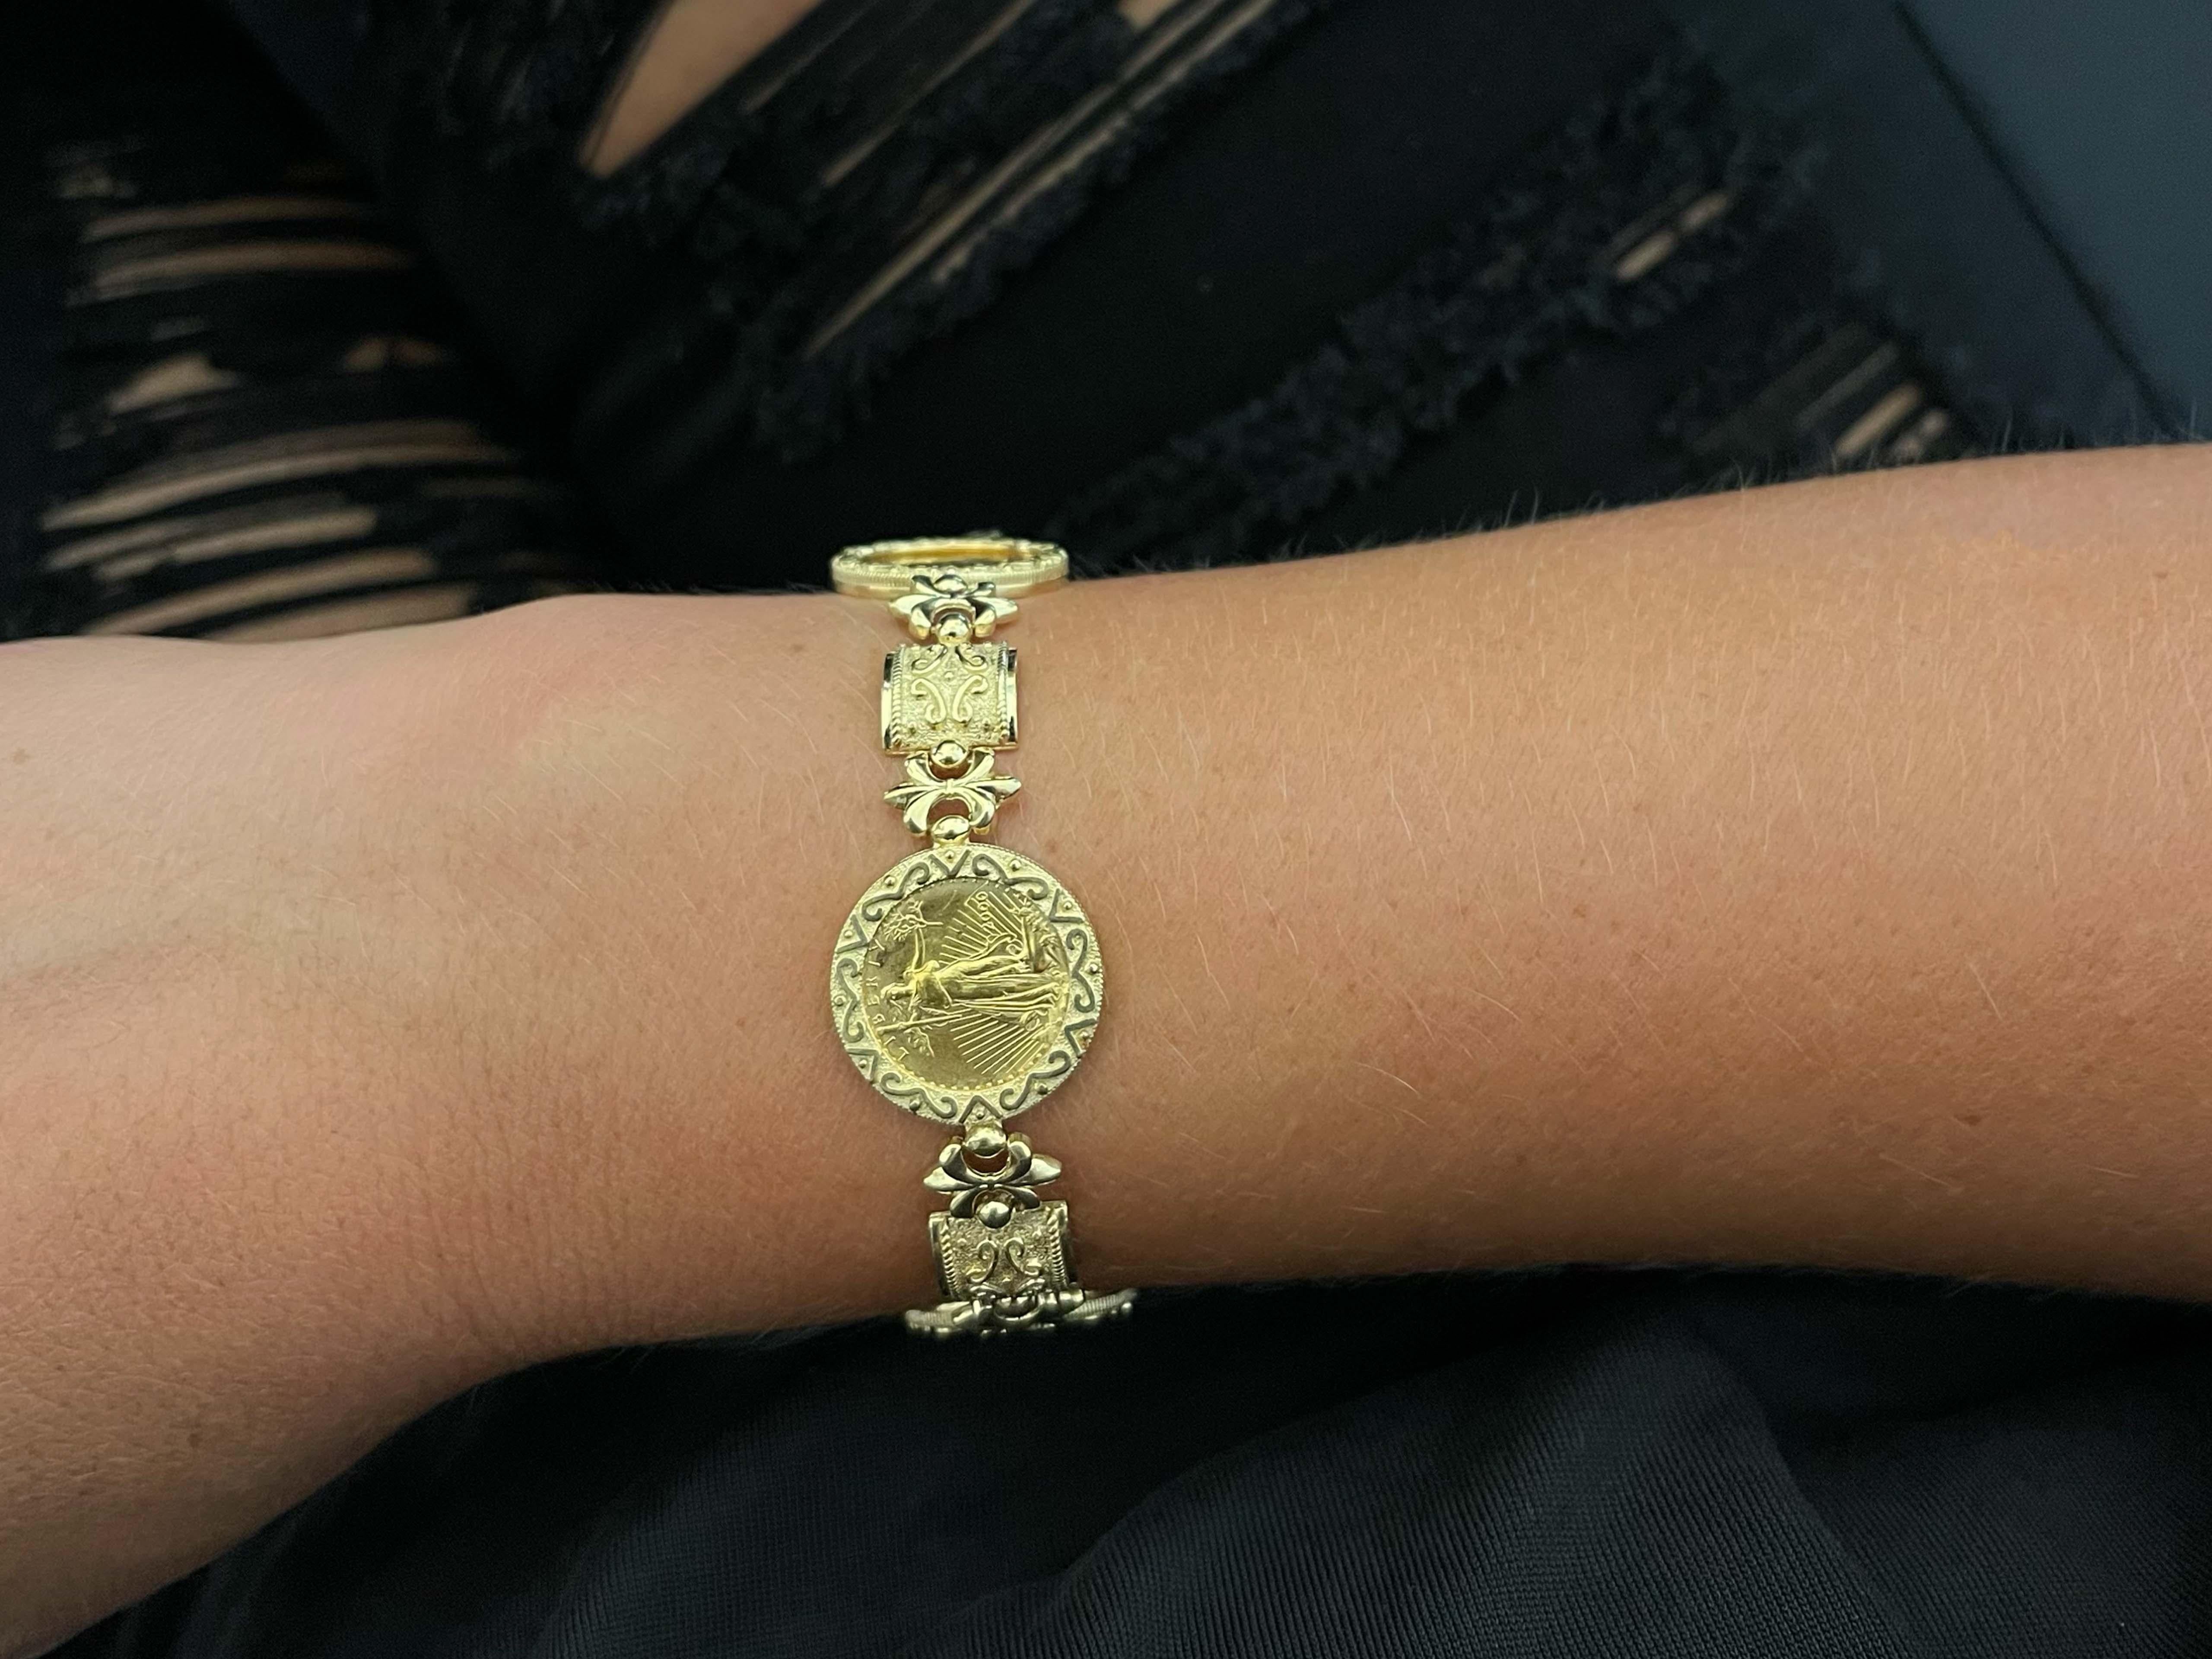 Item Specification:

Type: Coin Bracelet 
Metal: 14k Yellow Gold, 22K Gold Coins

Total Weight: 23.3 grams

Coins: 3 x 1/10 American Eagle Gold Coins

Bracelet Length: ~7 inches
​
​Bracelet Width: 19.4 mm at widest part 

Condition: Vintage in